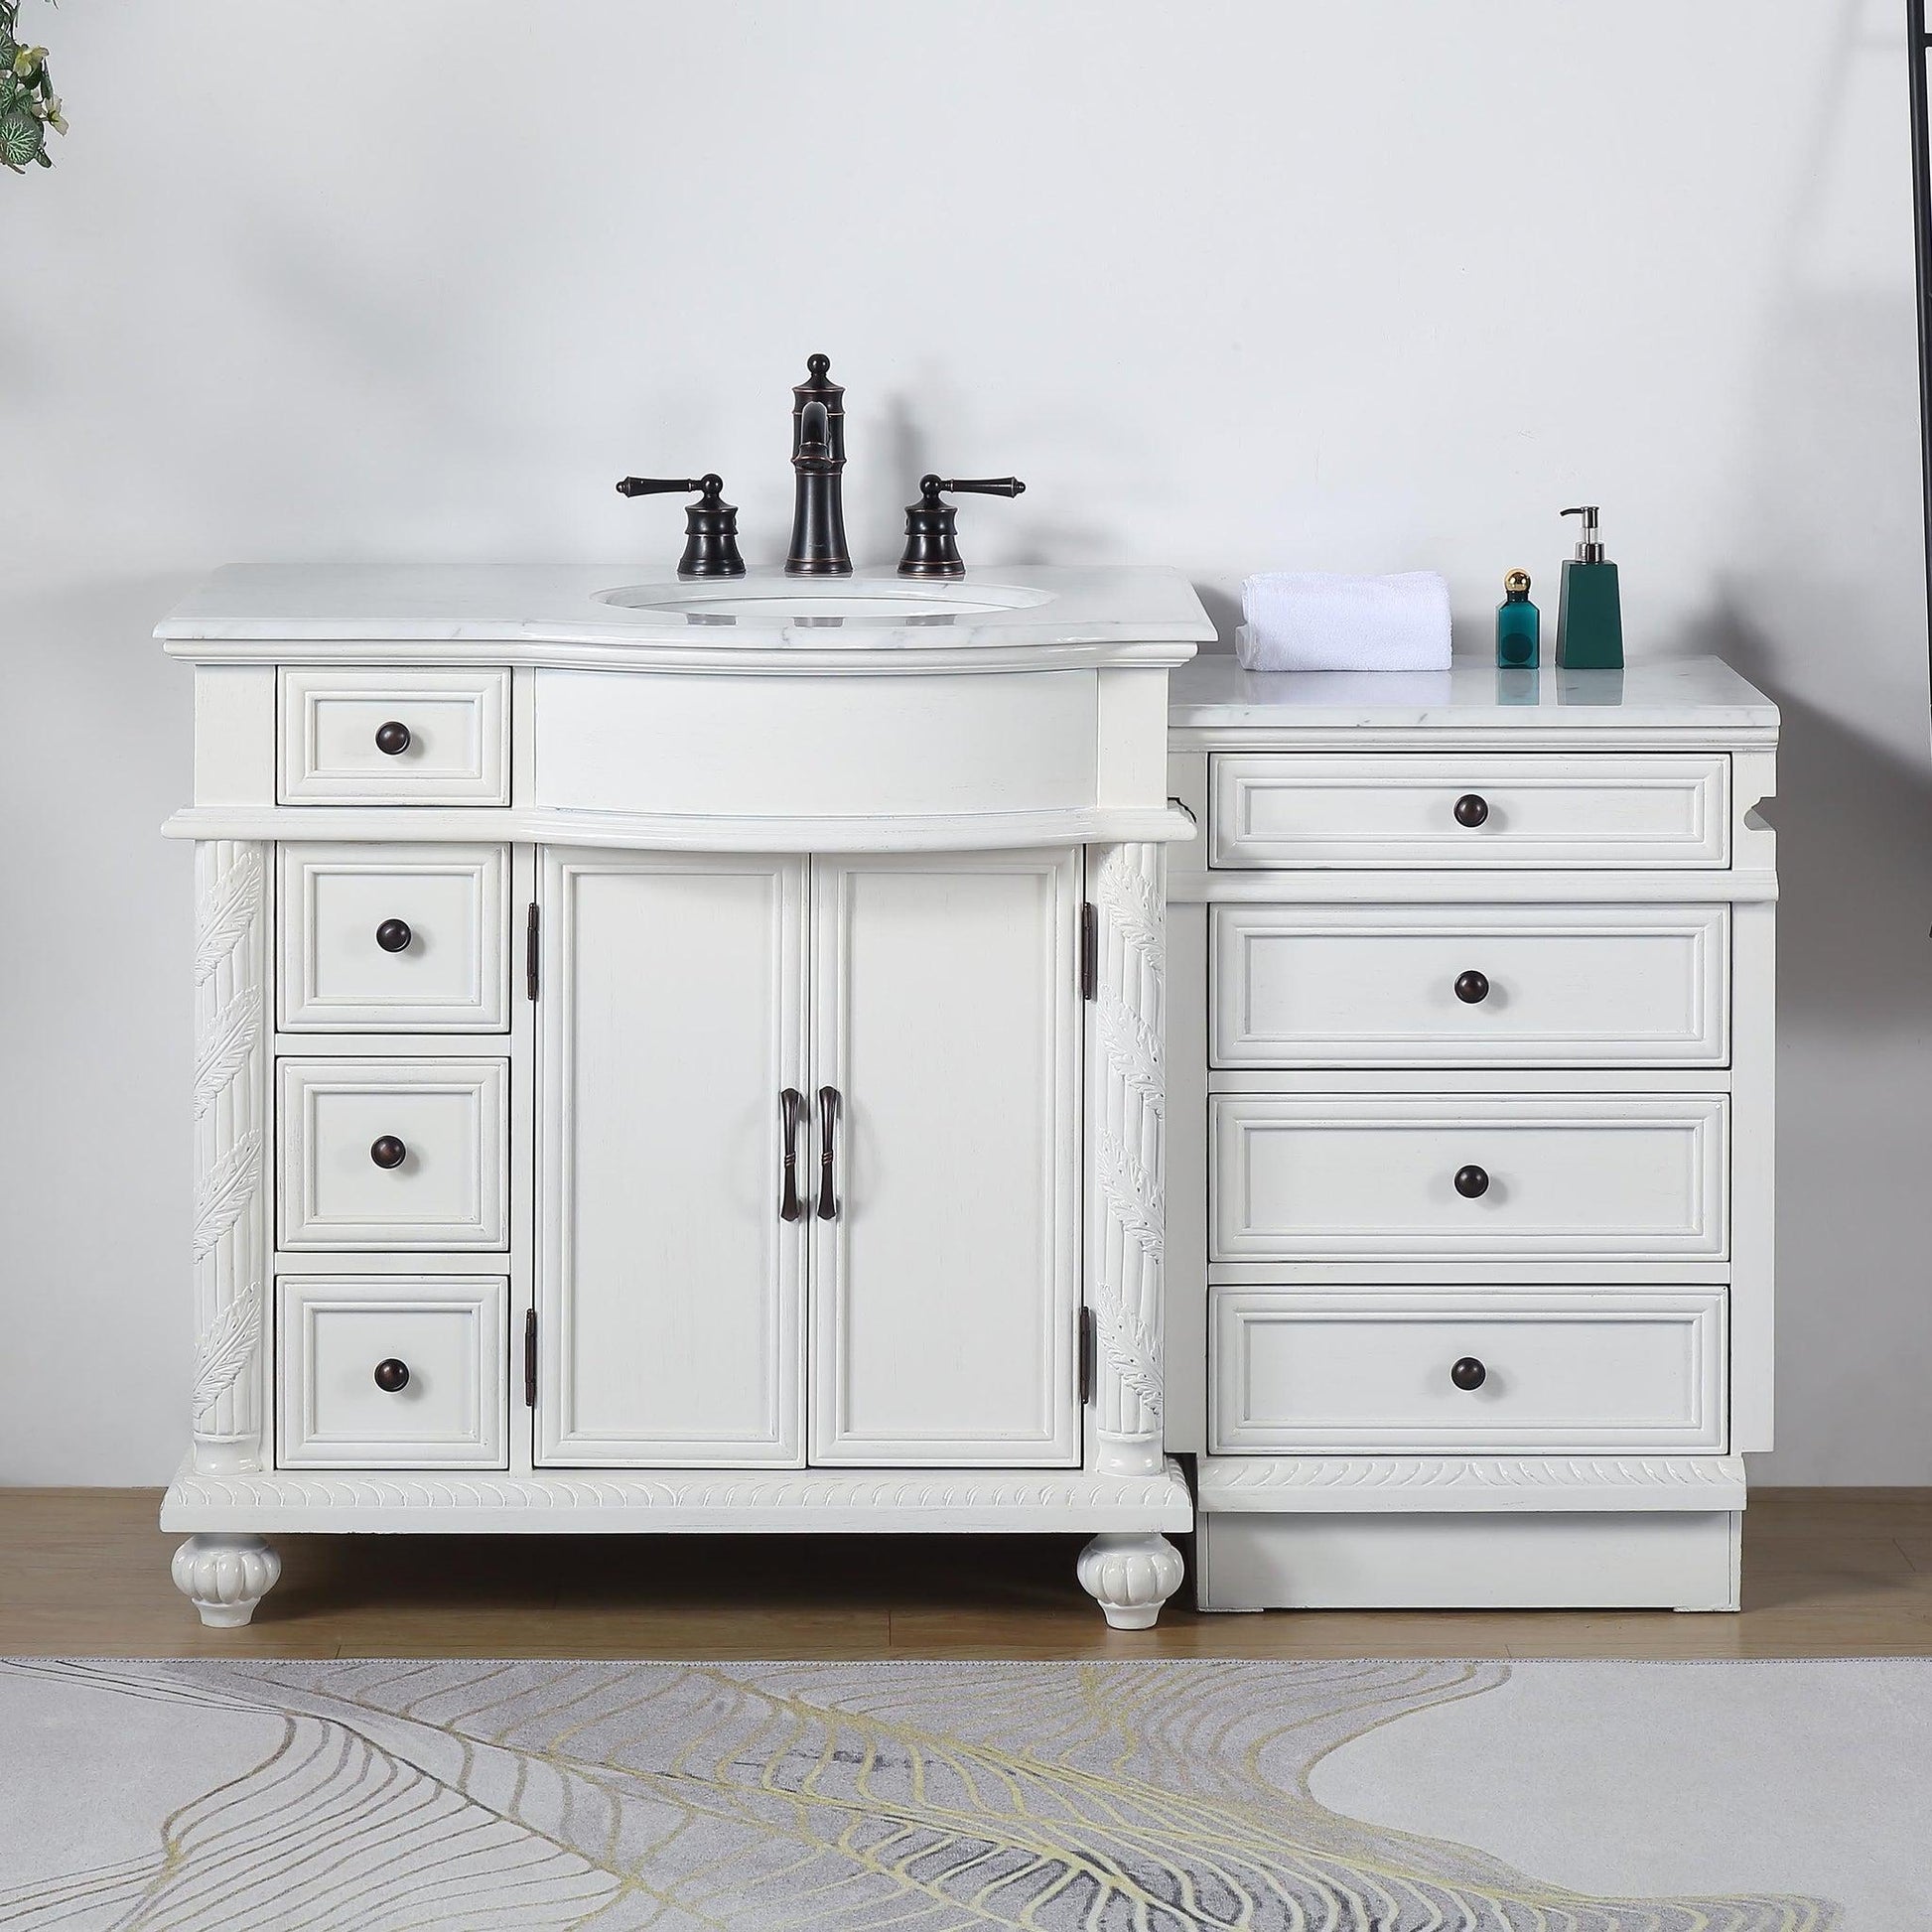 Silkroad Exclusive 56" Single Right Sink Antique White Modular Bathroom Vanity With Carrara White Marble Countertop and White Ceramic Undermount Sink